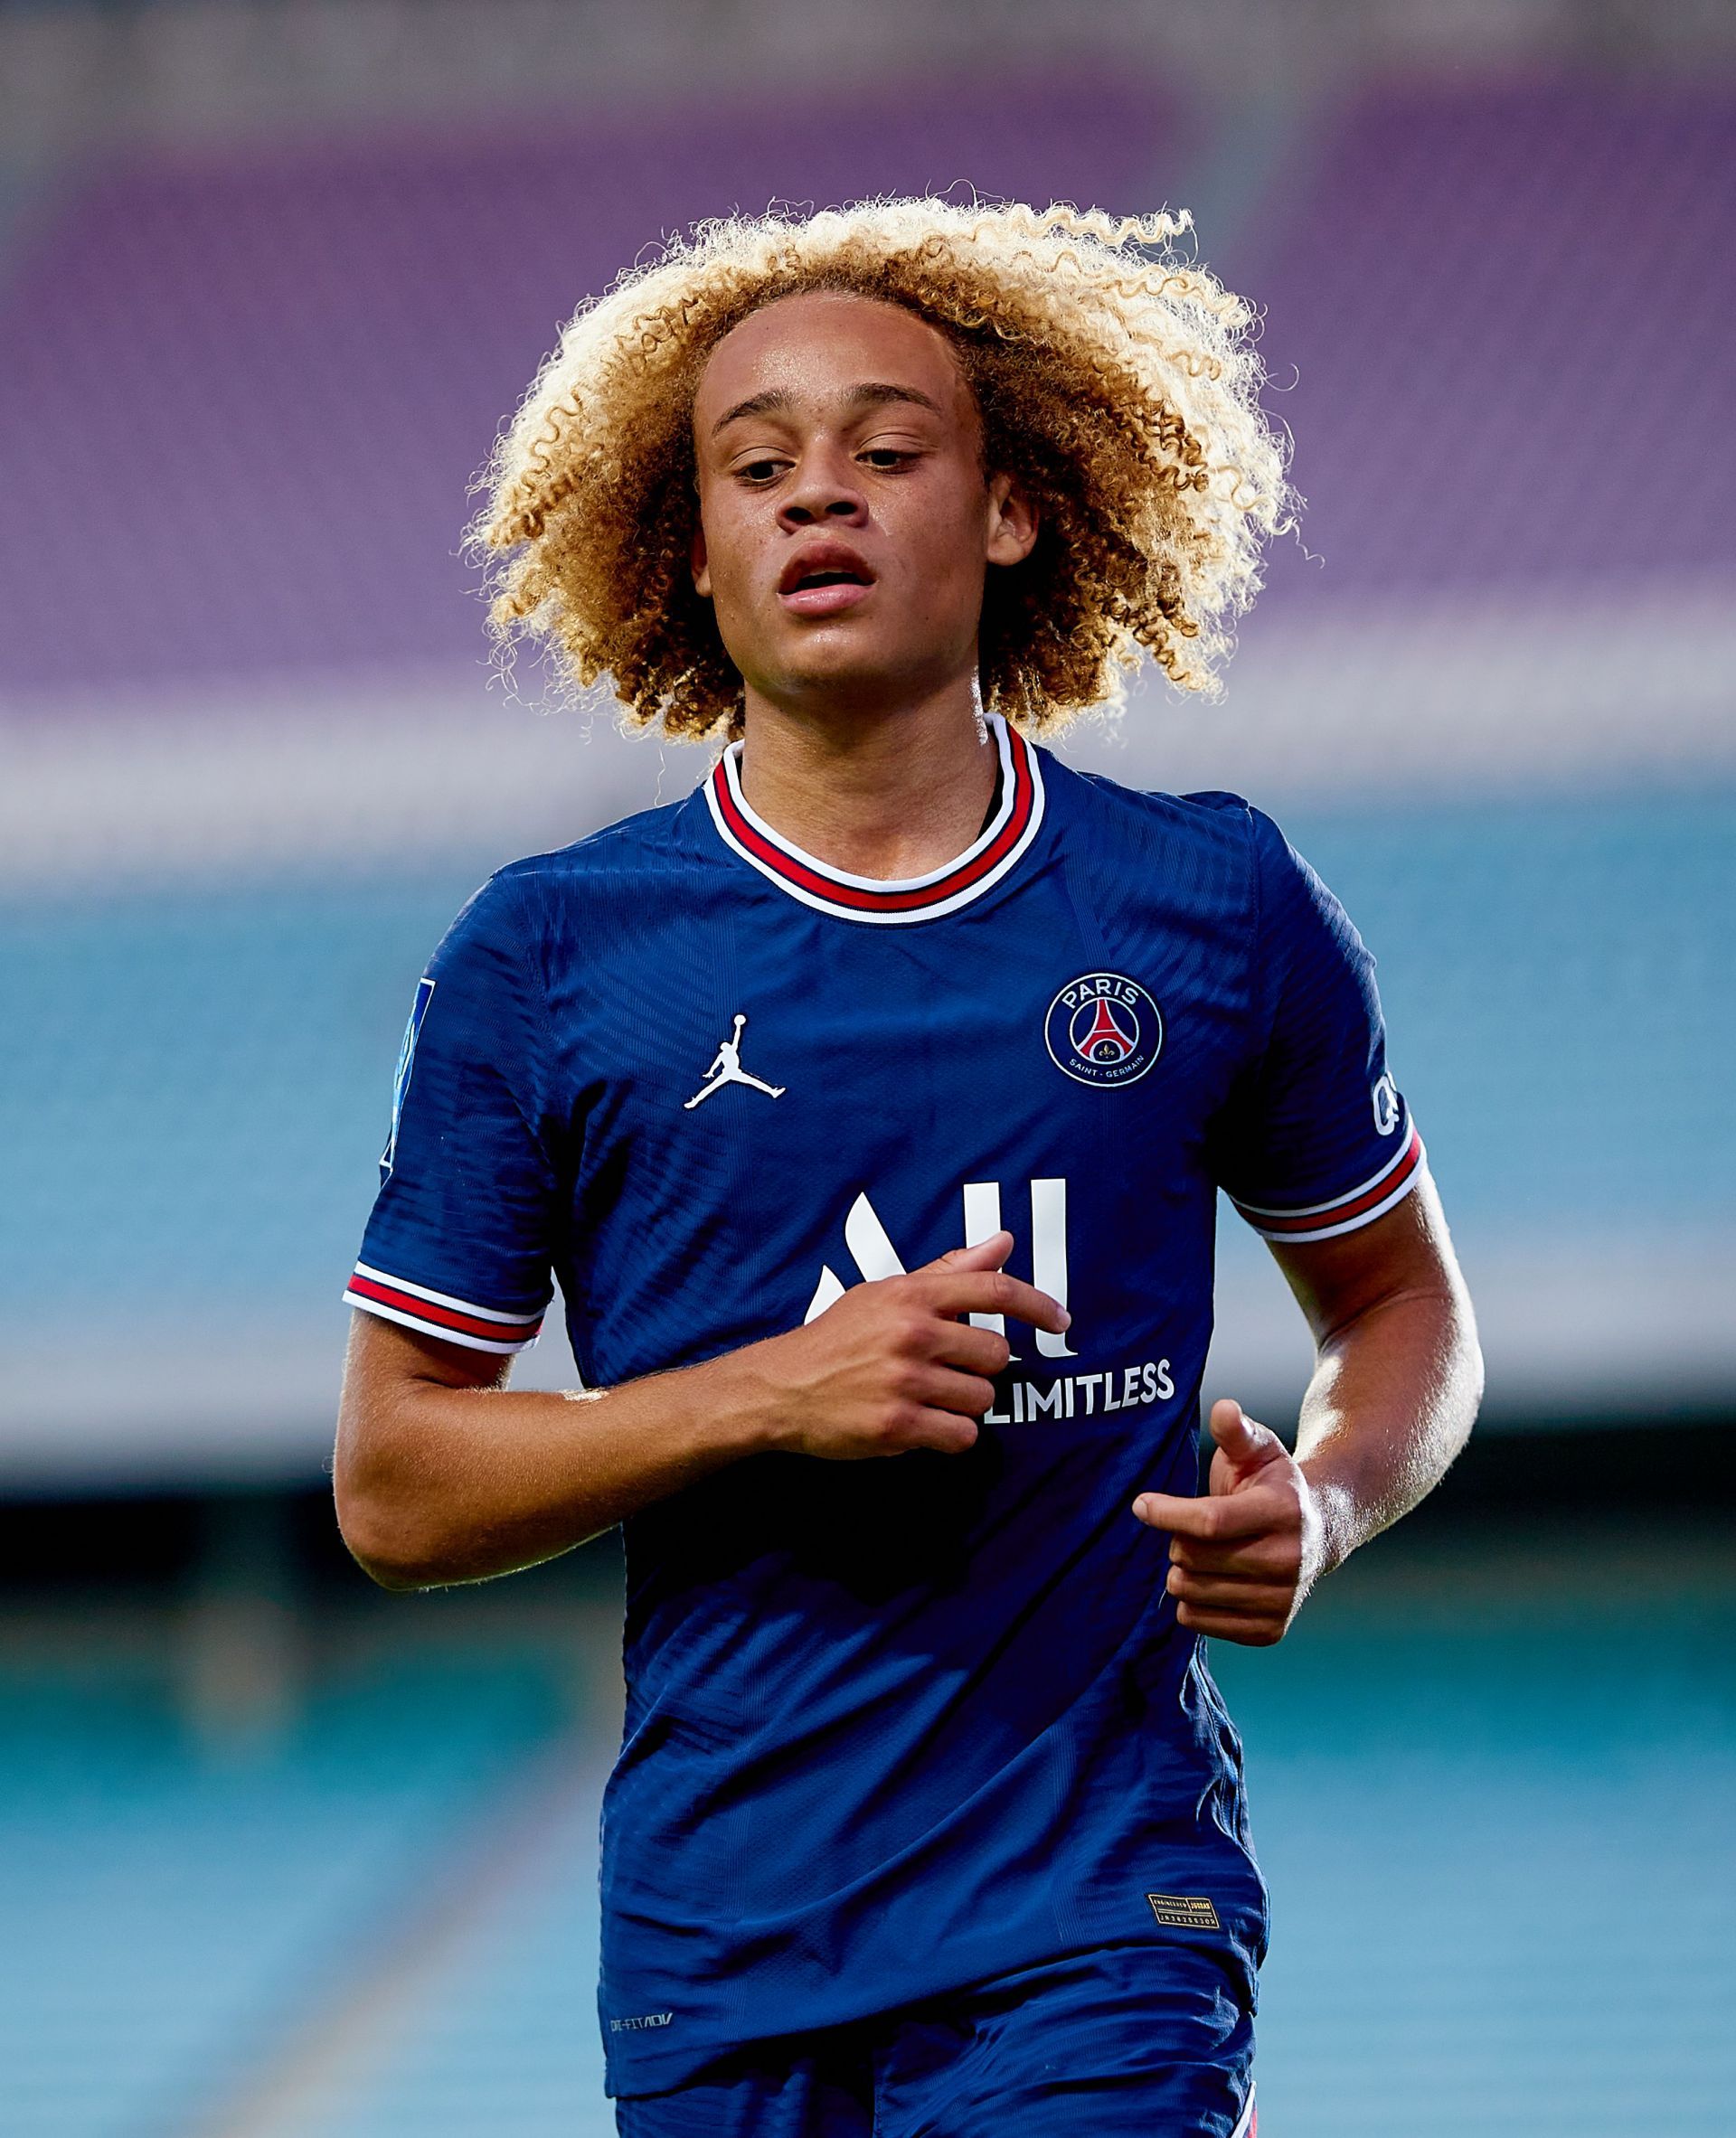 Xavi Simons has found opportunities hard to come by since joining PSG